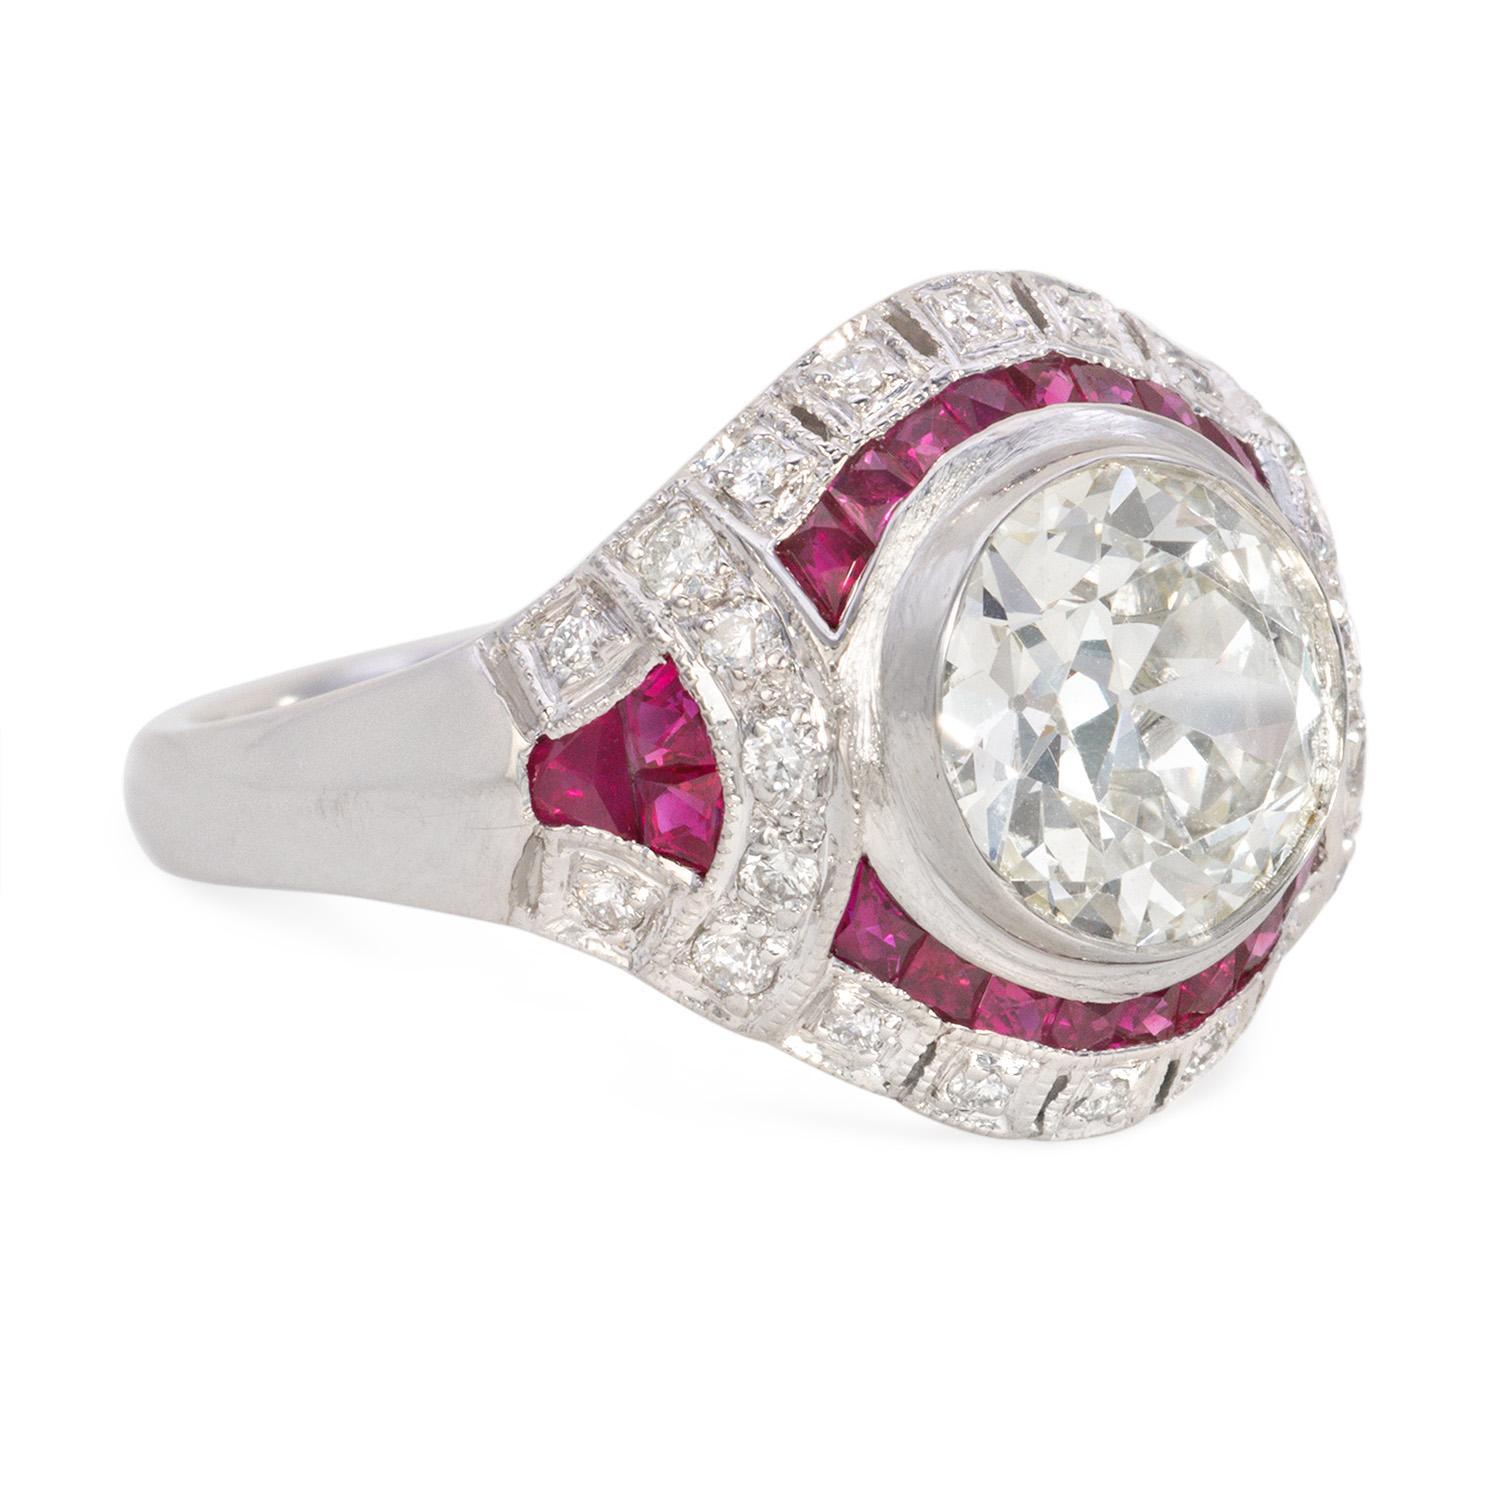 This stunning Art Deco ring features a GIA-certified 2.56-carat diamond with an N VS1 clarity. The center diamond is elegantly surrounded by 1.15 carats of vibrant rubies, adding a pop of color to the platinum setting. With a total diamond weight of